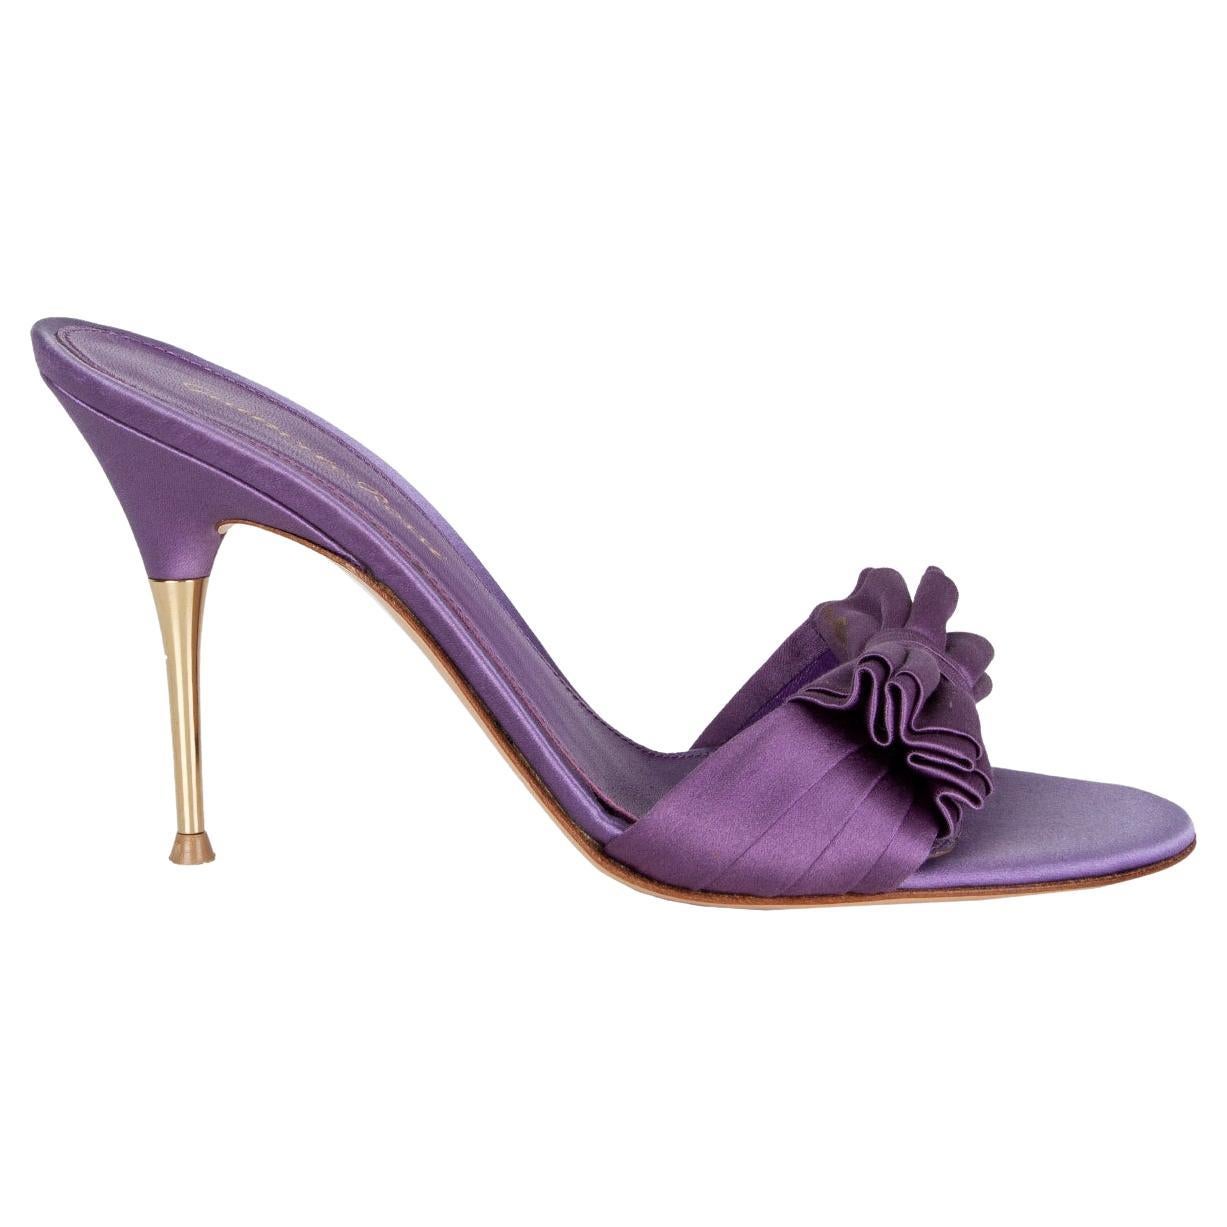 GIANVITO ROSSI purple SATIN PLEATED BOW Sandals Shoes 37 For Sale